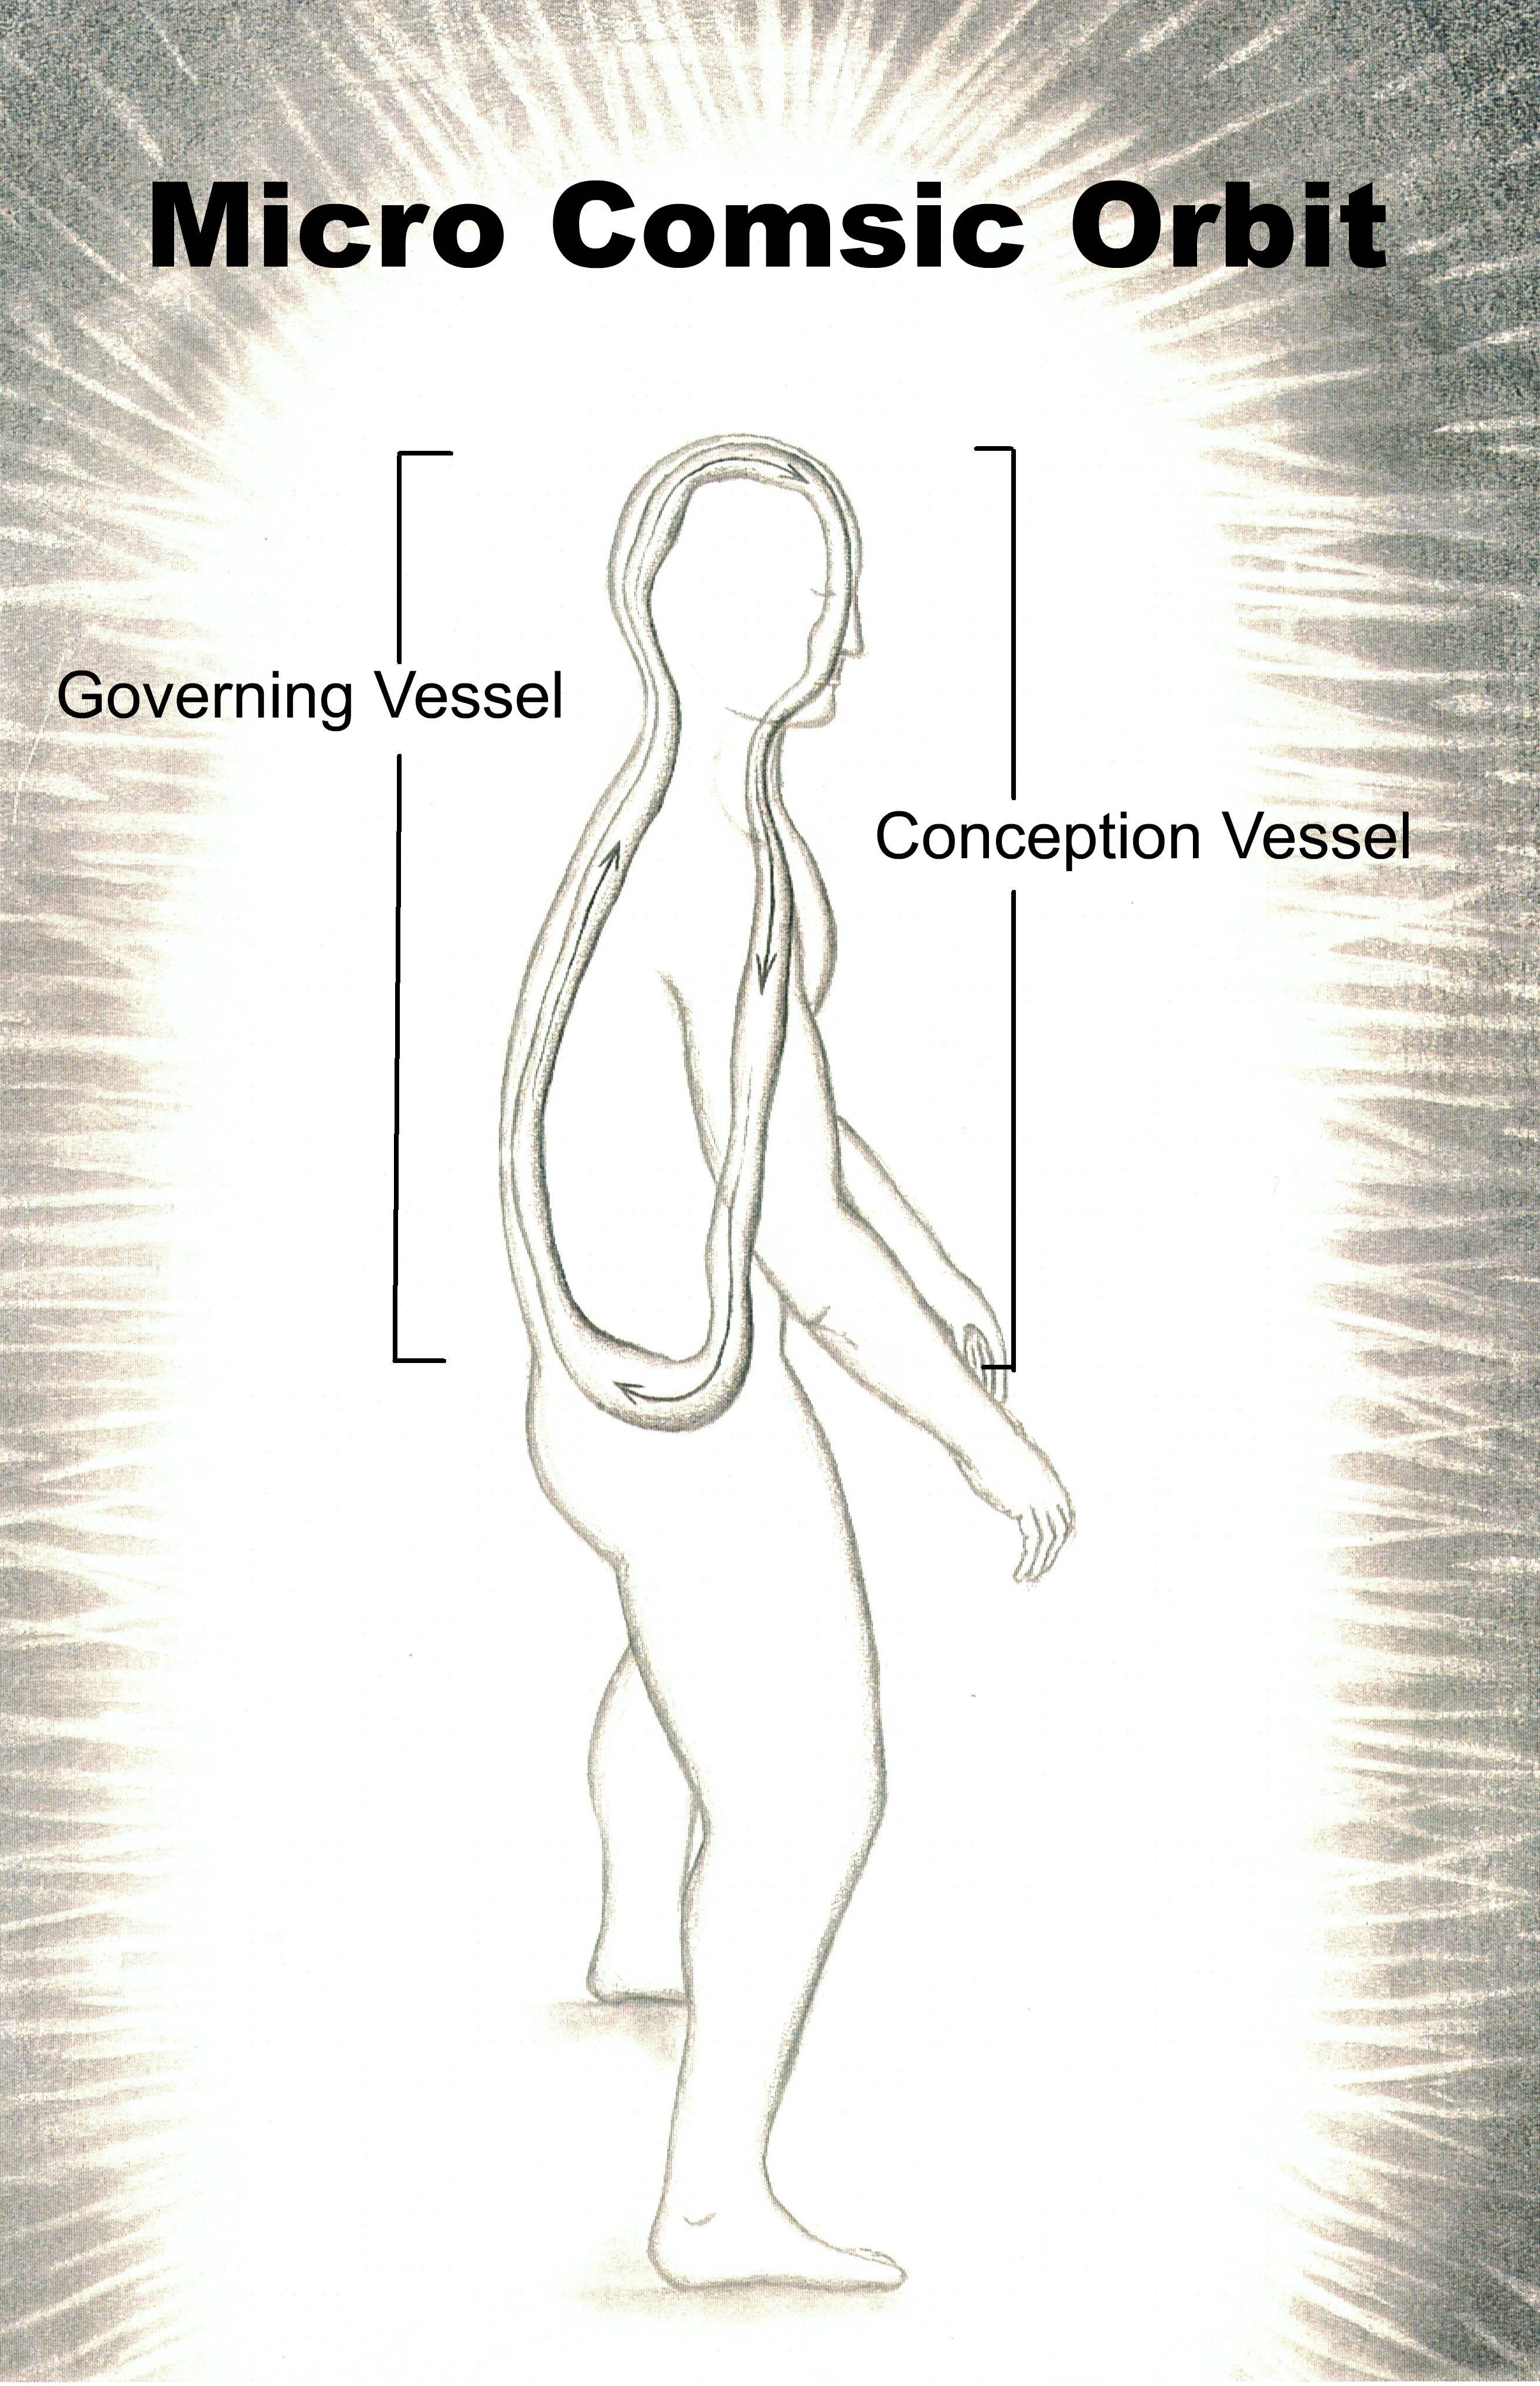 Figure-9-Micro-Cosmic-Orbit-governing-and-Conception-vessesl